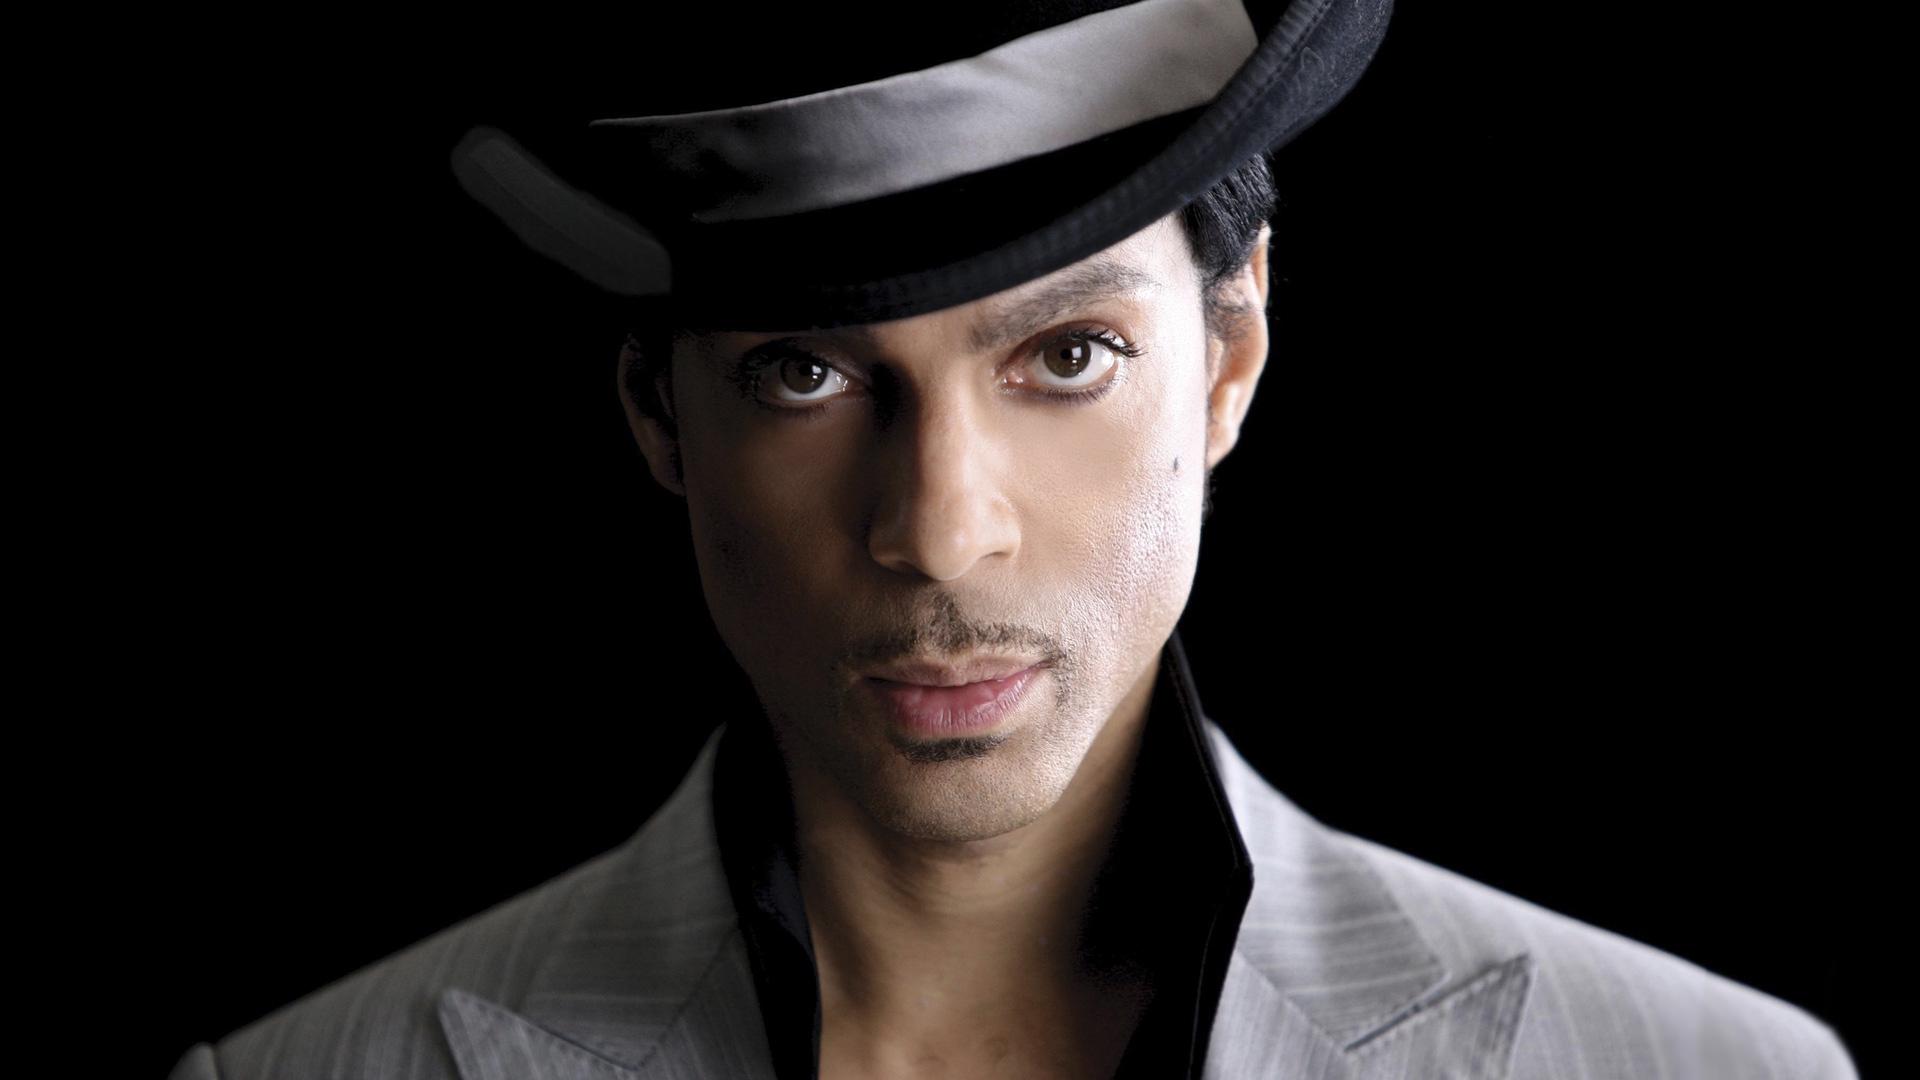 Download wallpaper 1920x1080 prince, singer, rhythm and blues